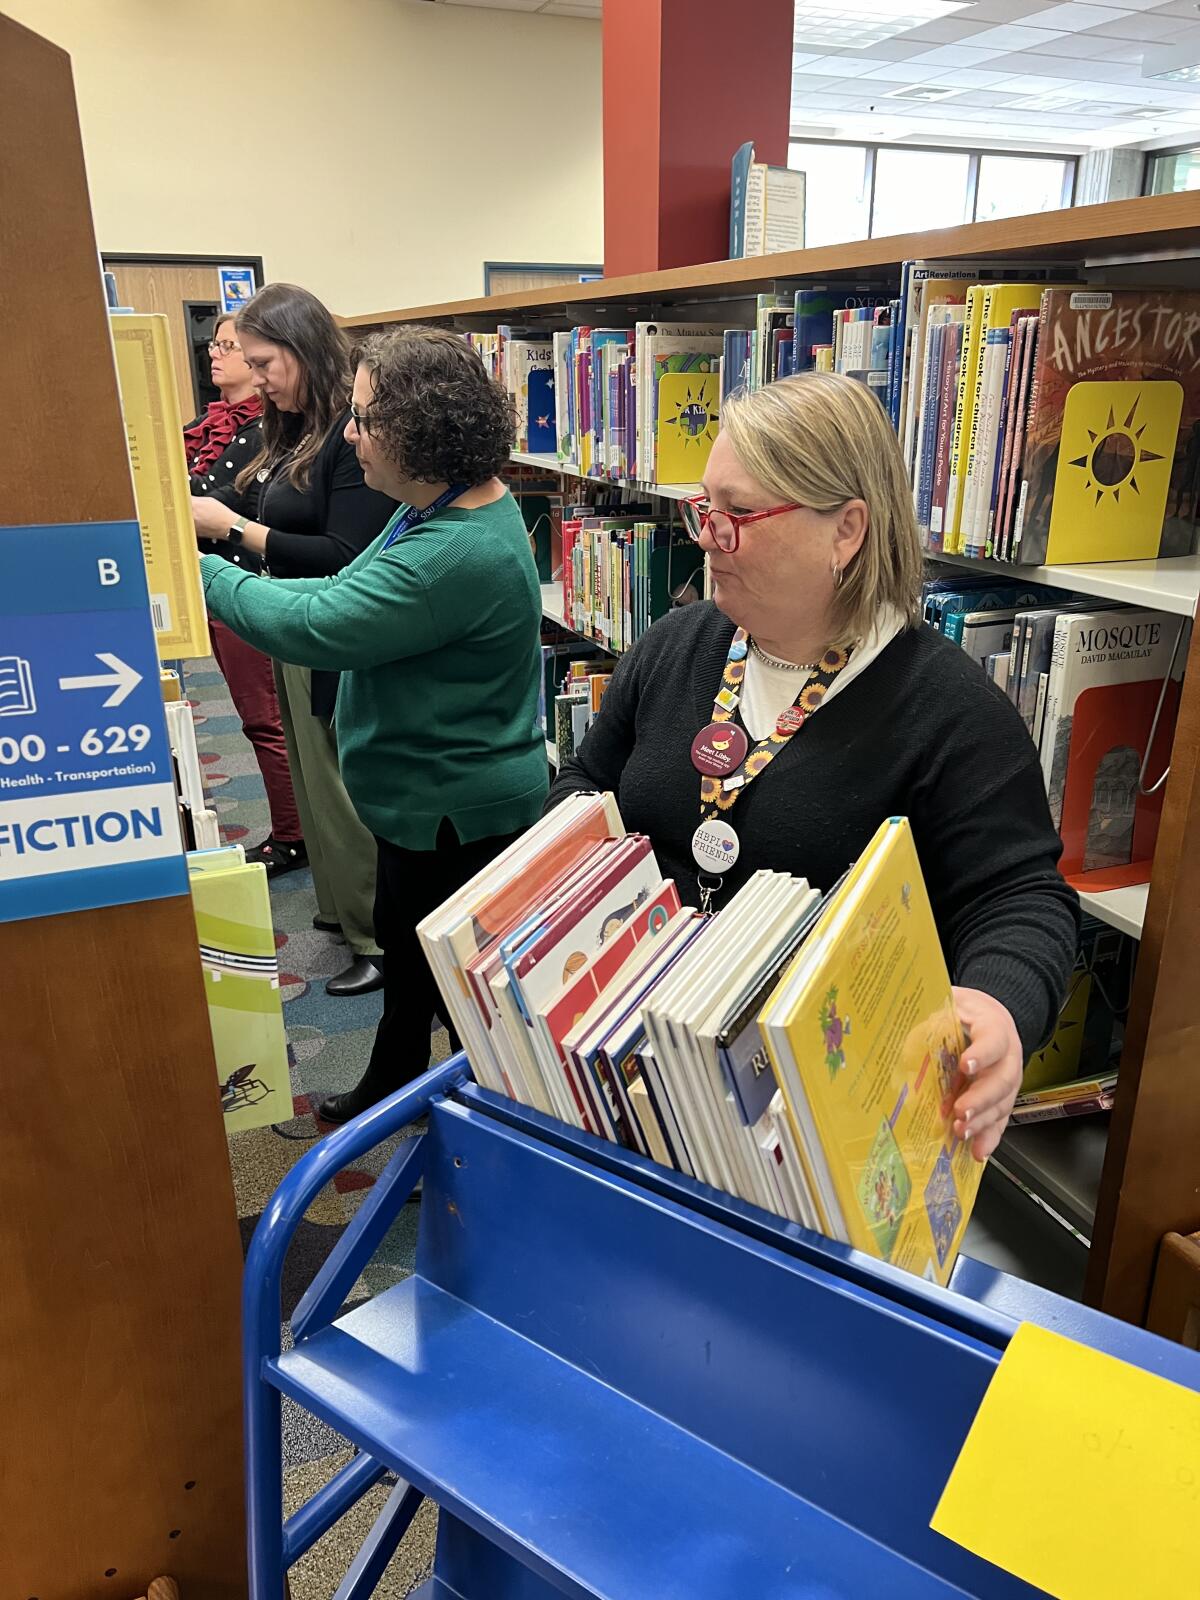 Librarians take books off the shelves for possible recategorization.